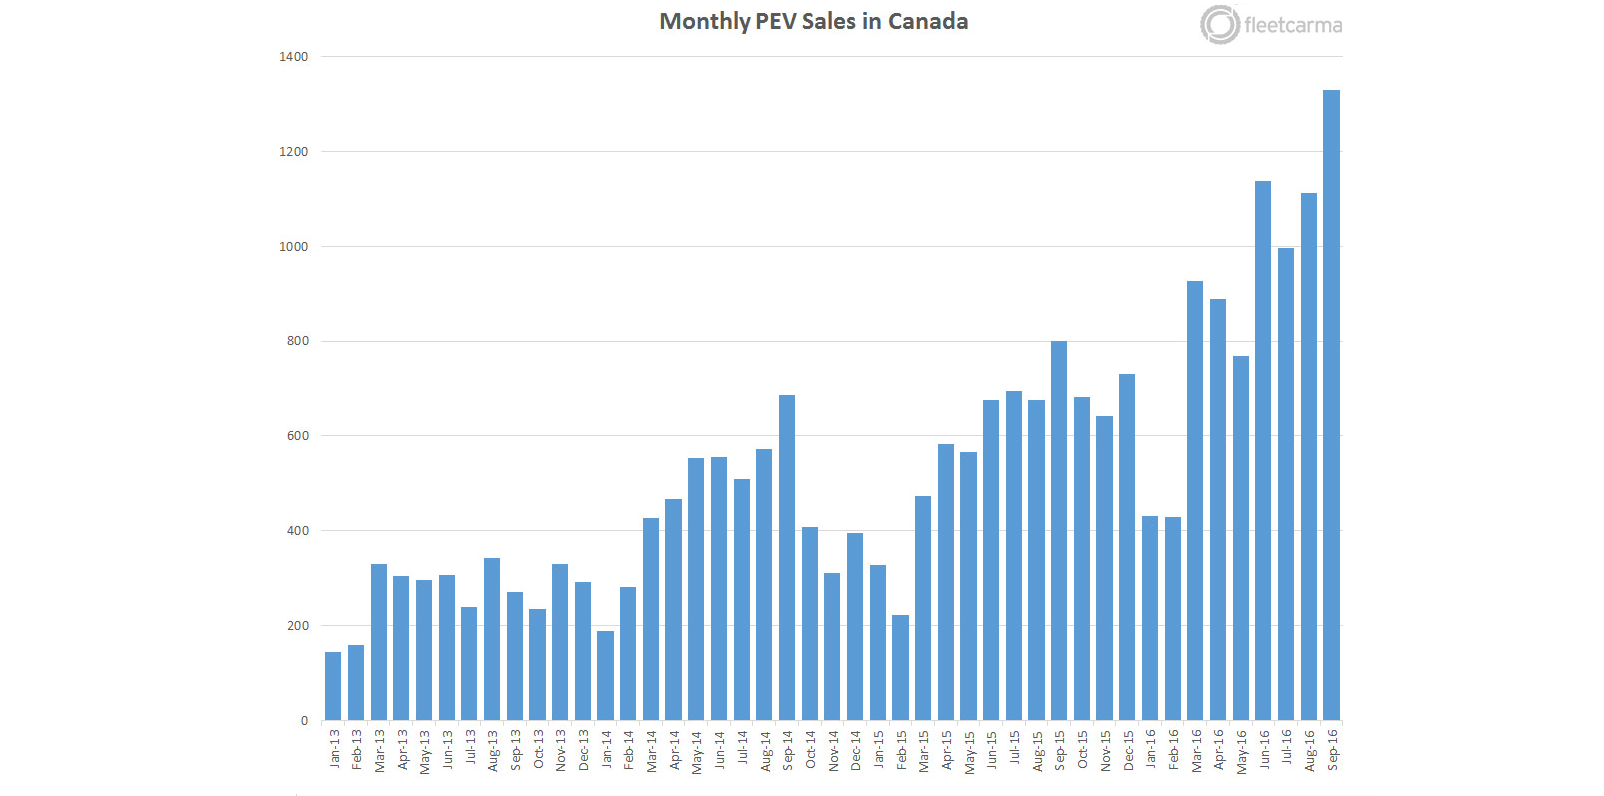 Canada reaches record numbers of electric car sales helped by launch of